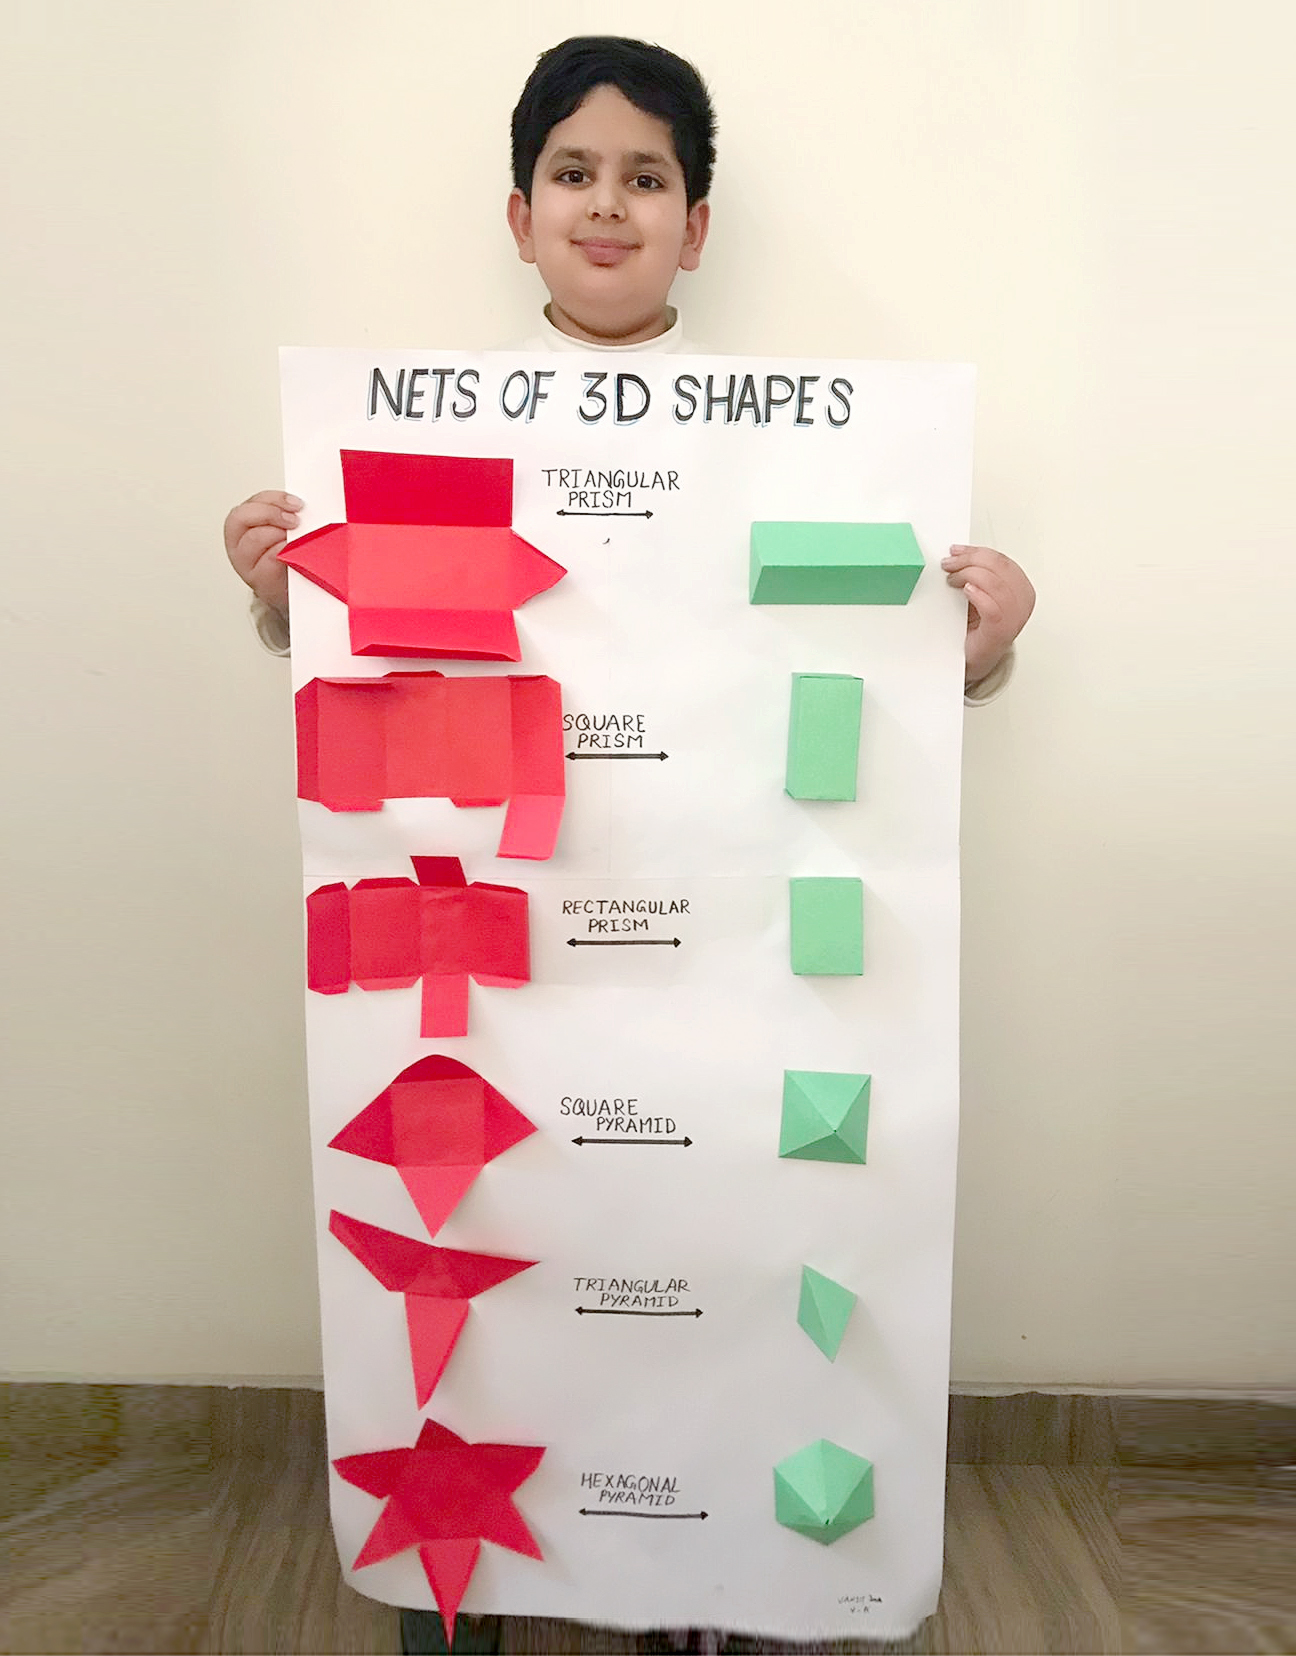 STUDENTS LEARN ABOUT THE 3D SHAPES WITH A FUN ACTIVITY